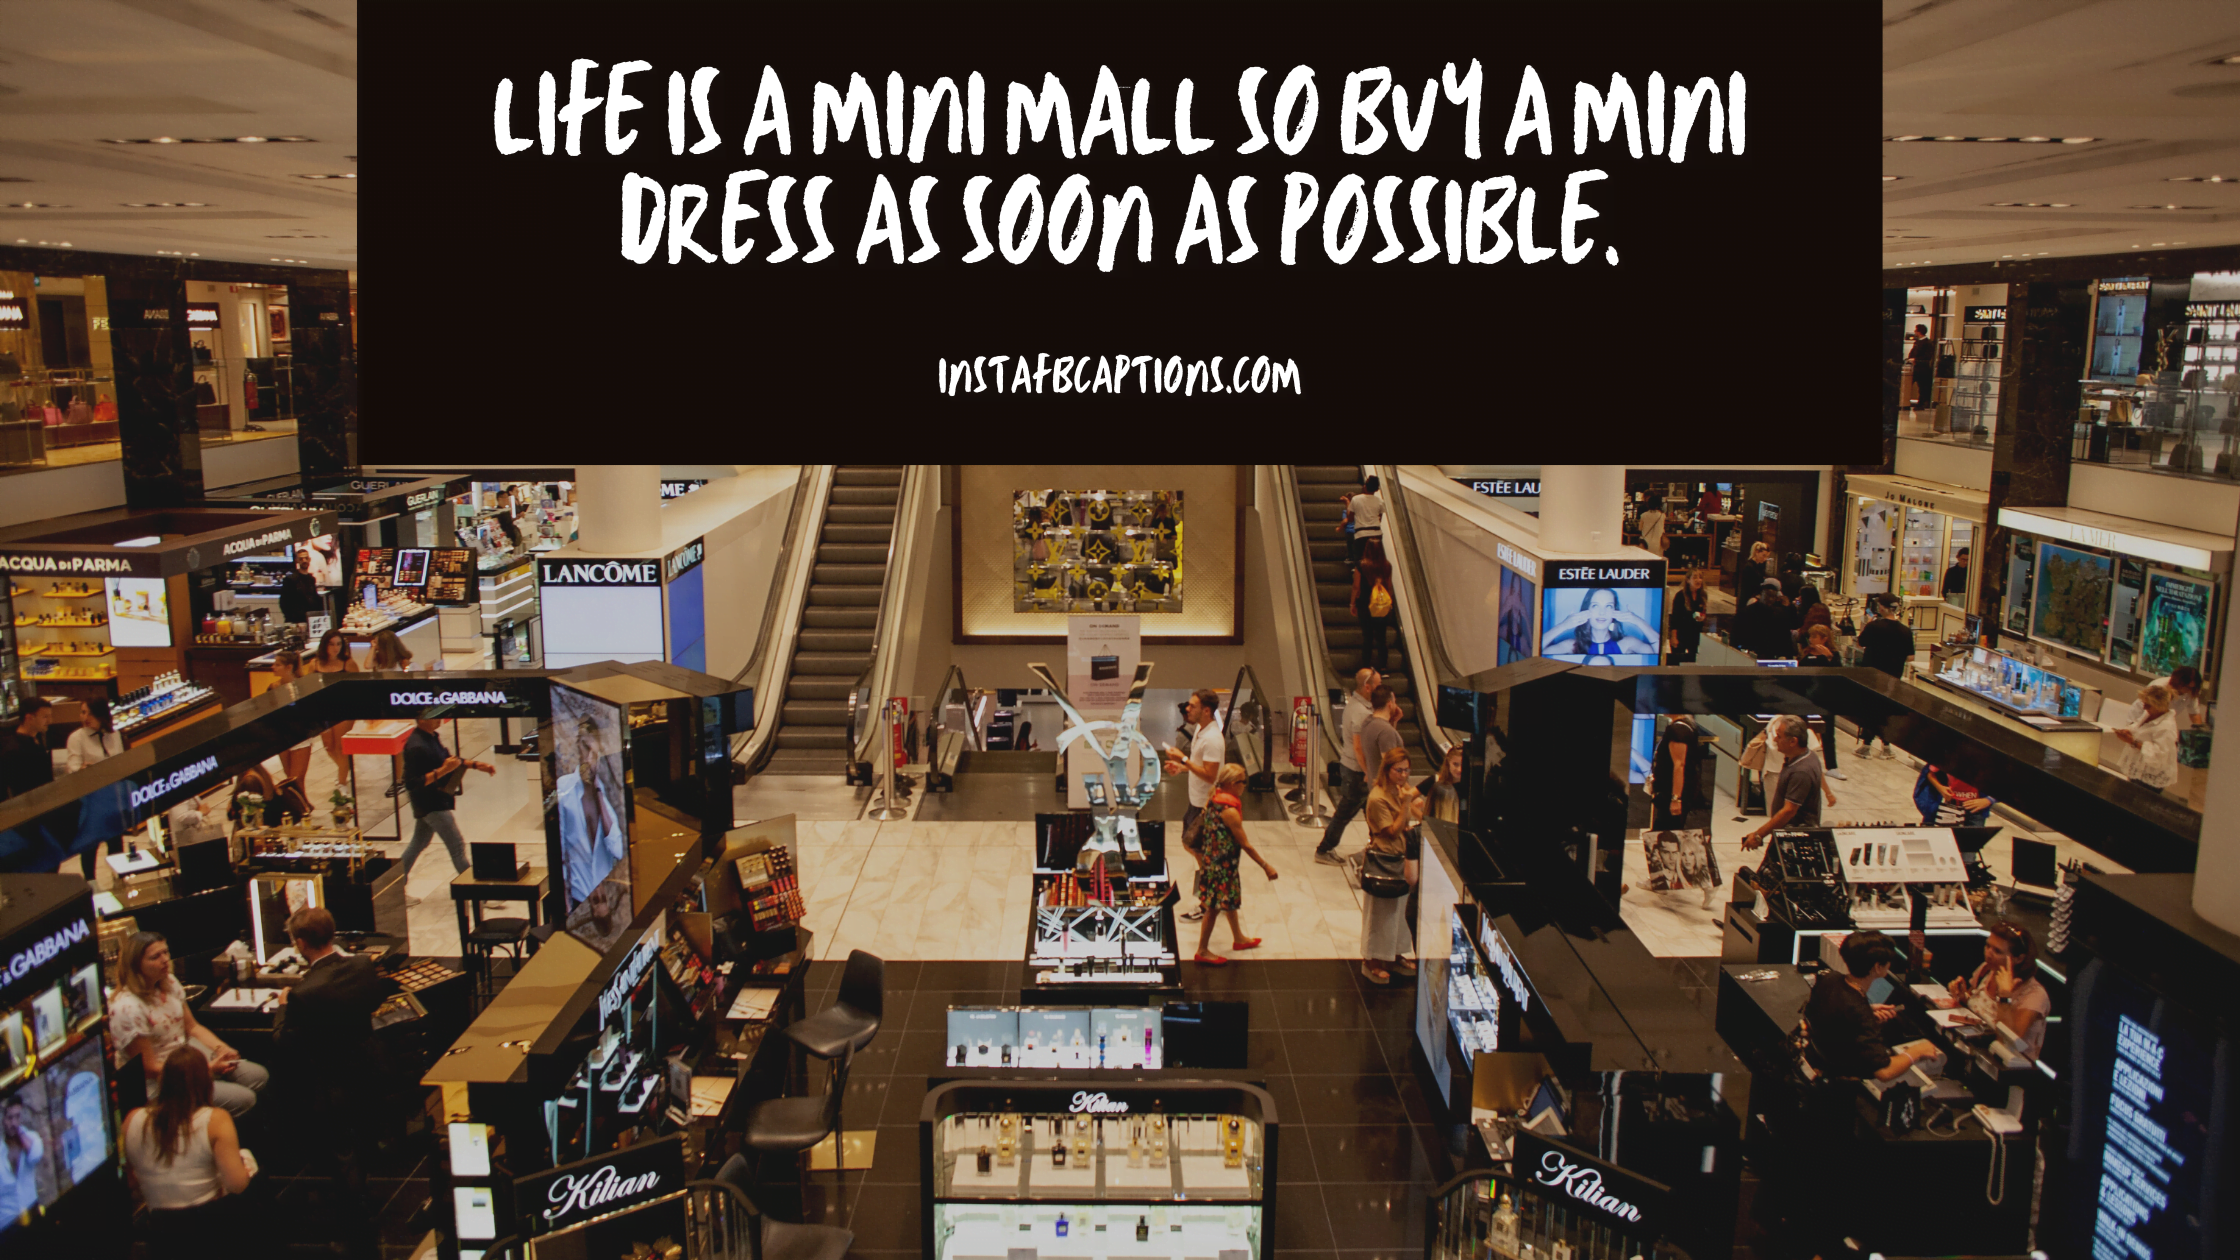 A Unknown Mall at the background and a caption written - Life is a Mini Mall so buy a mini dress as soon as possible.  - Shopping Mall Instagram captions - 120+ SHOPPING Instagram Captions &#038; Quotes 2023